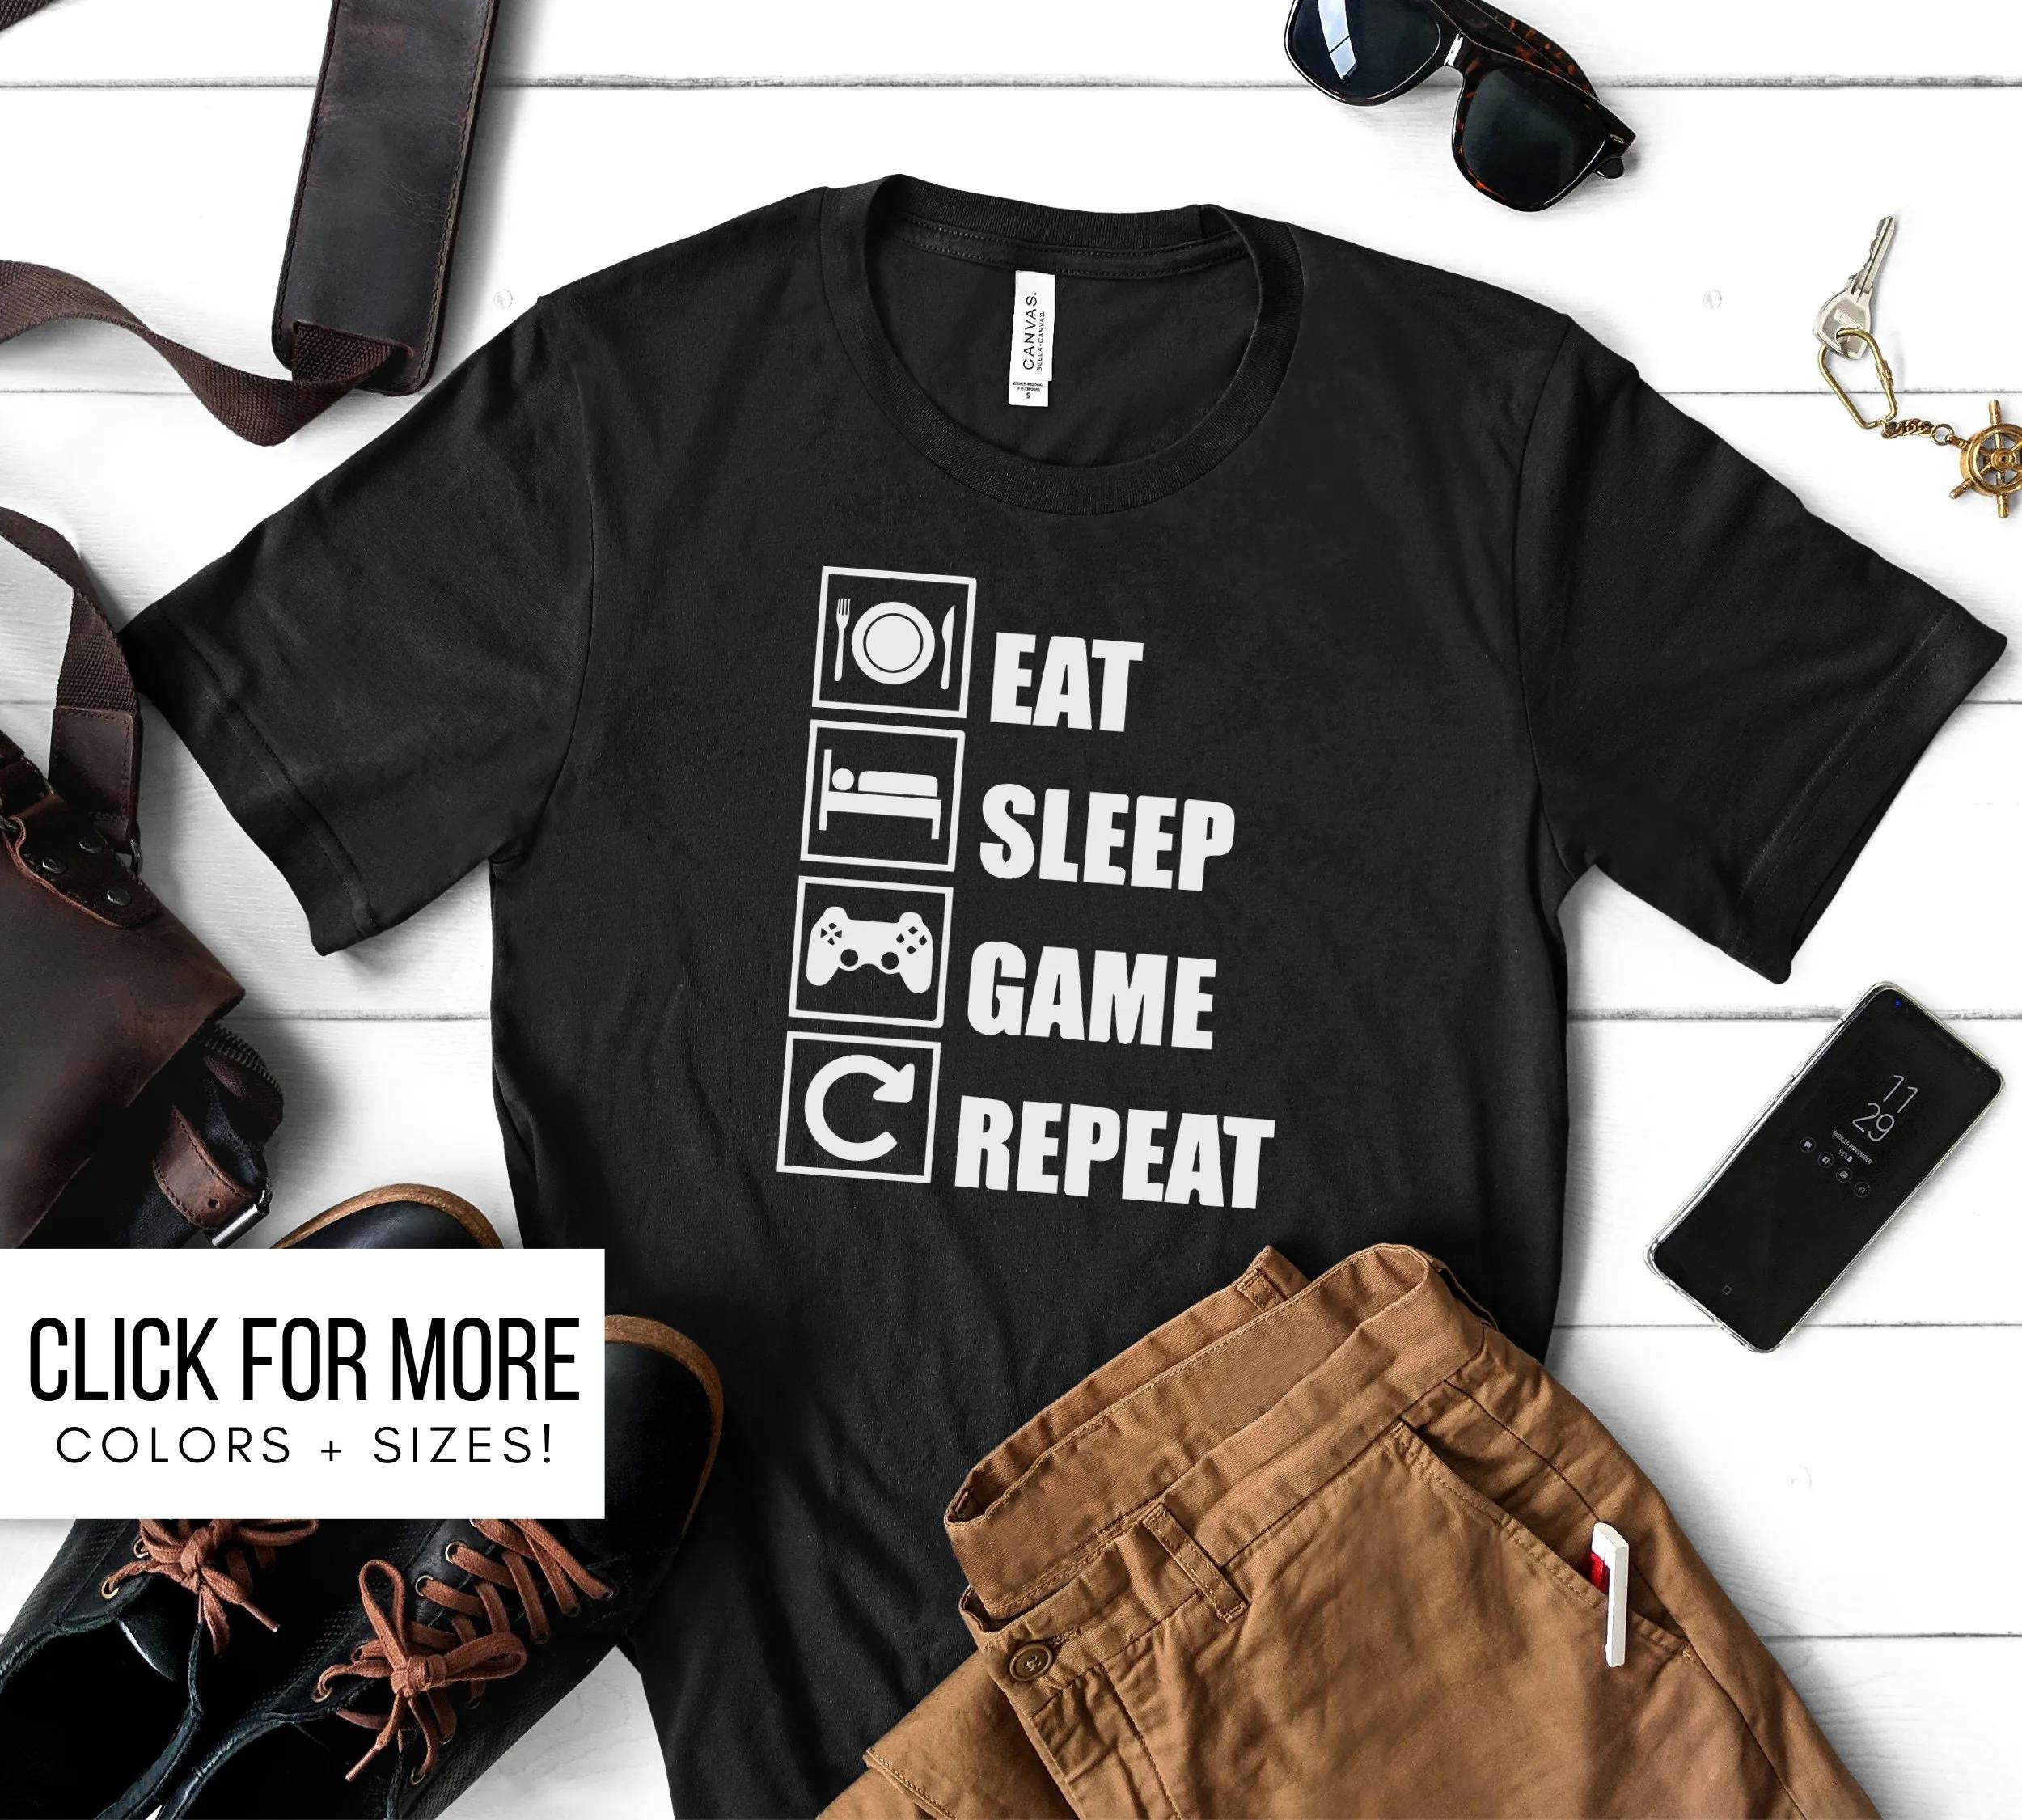 Eat Sleep Game Repeat Shirt for Fathers Day Gift, Eat Sleep Game Repeat Tshirt for Men, Funny Gamer Gift for Him, Gaming Dad T Shirt